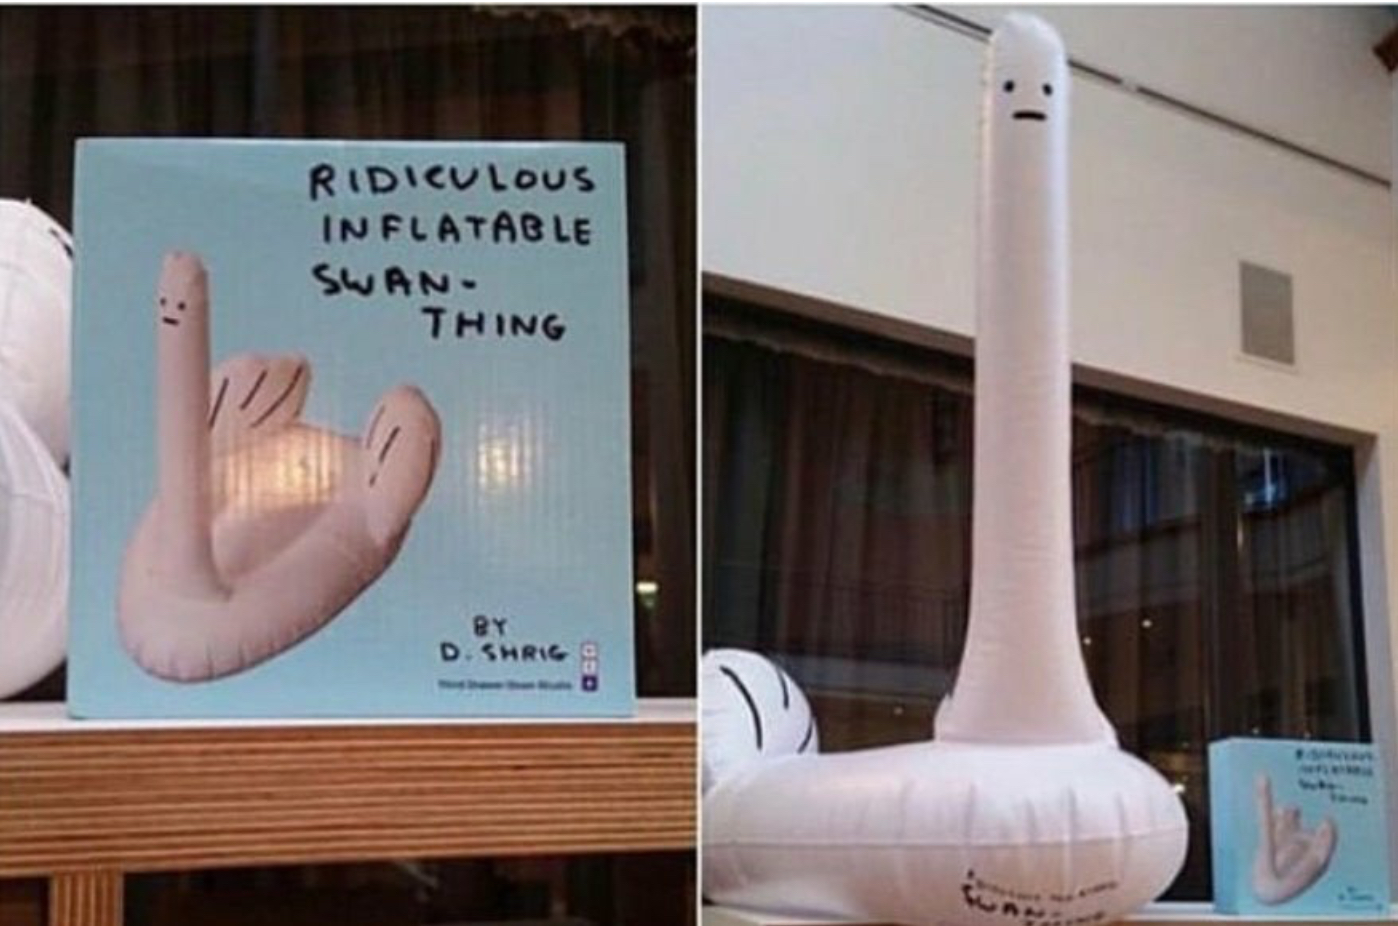 High Quality Inflatable swan thing Blank Meme Template